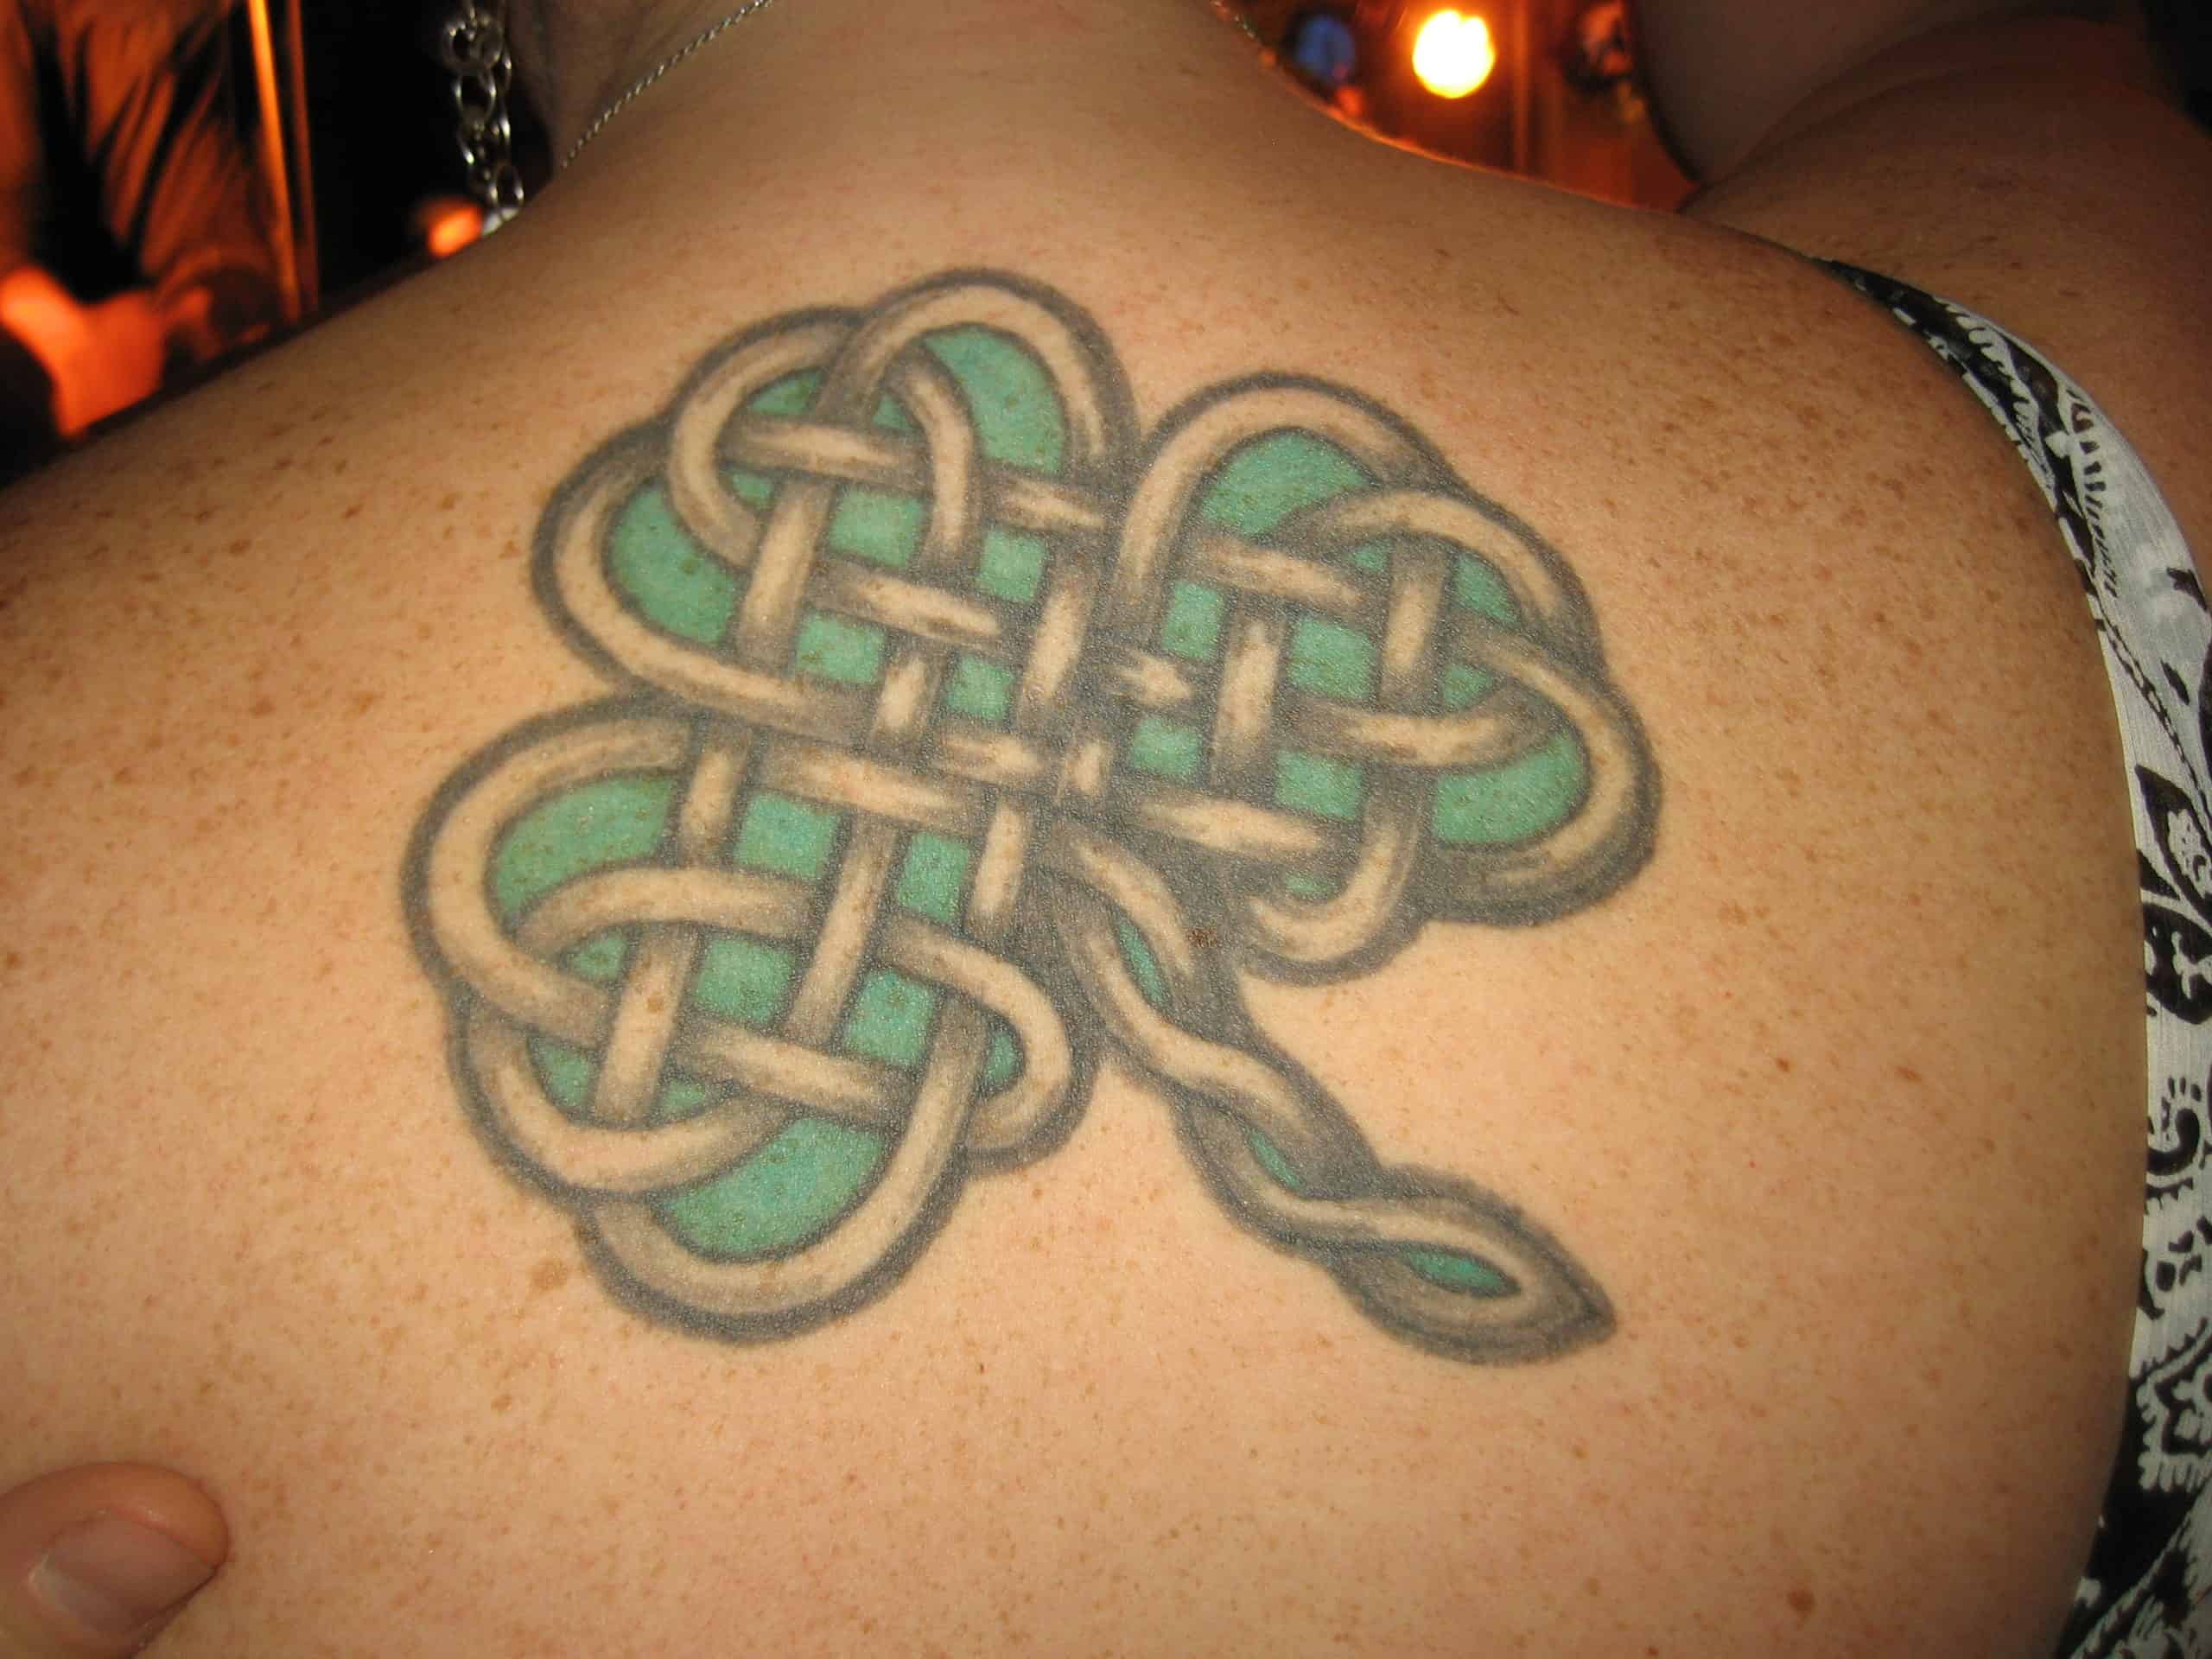 Tattoos Of Ancient Celtic Symbols To Protect Yourself - Cultura Colectiva